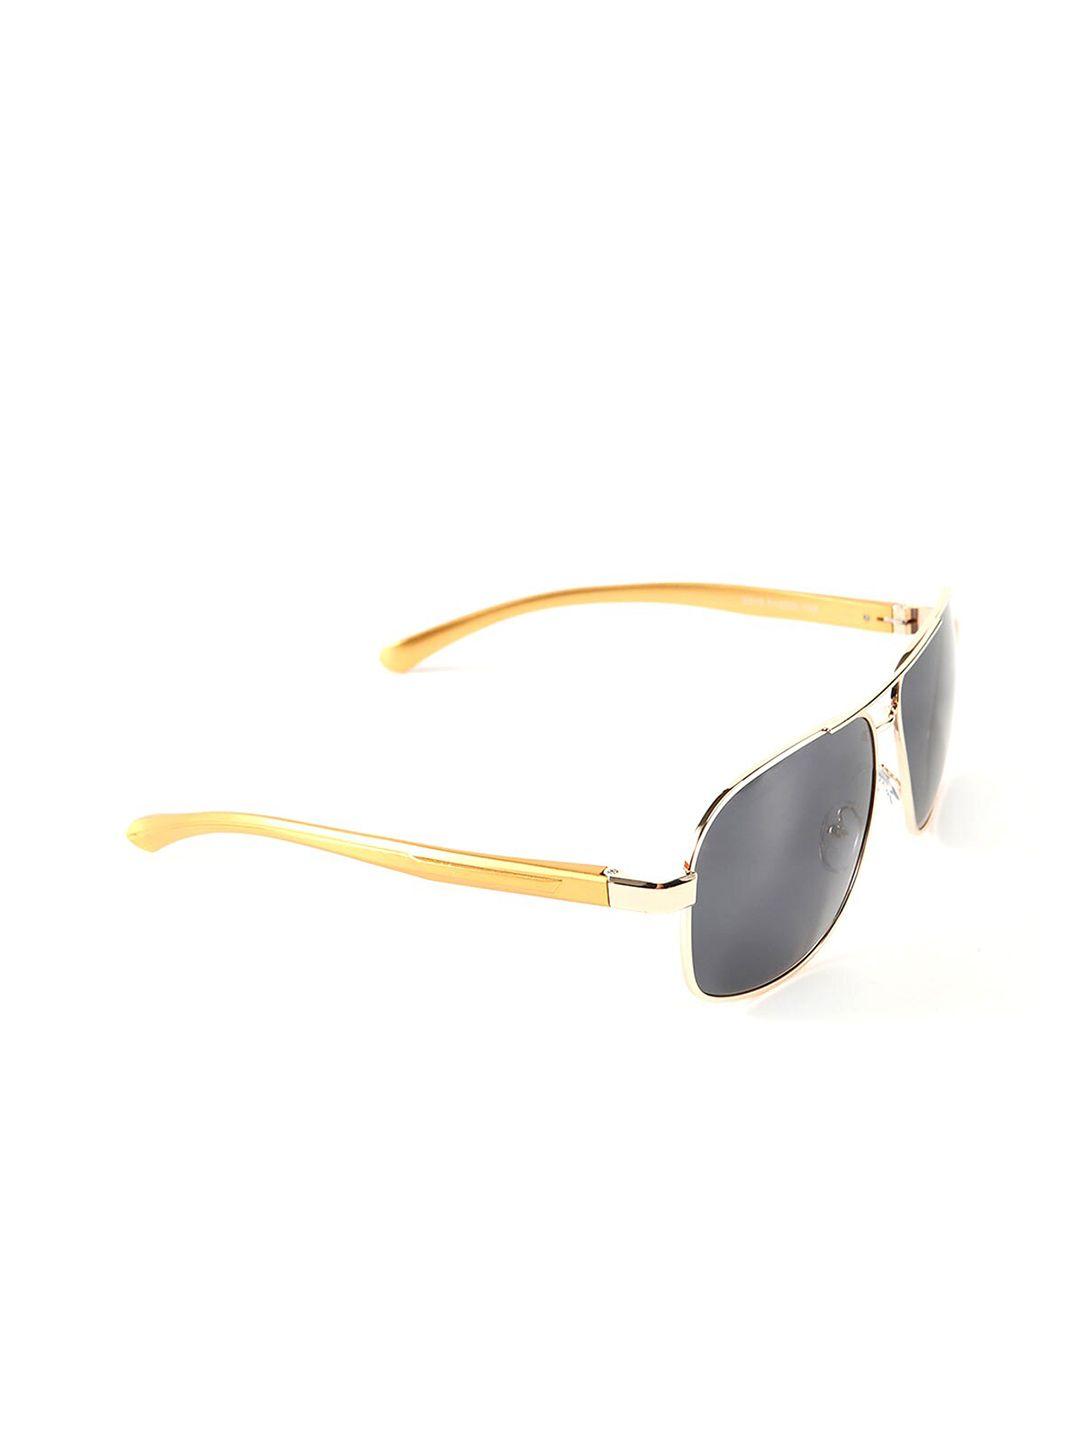 intellilens unisex black lens & gold-toned square sunglasses with polarised and uv protected lens